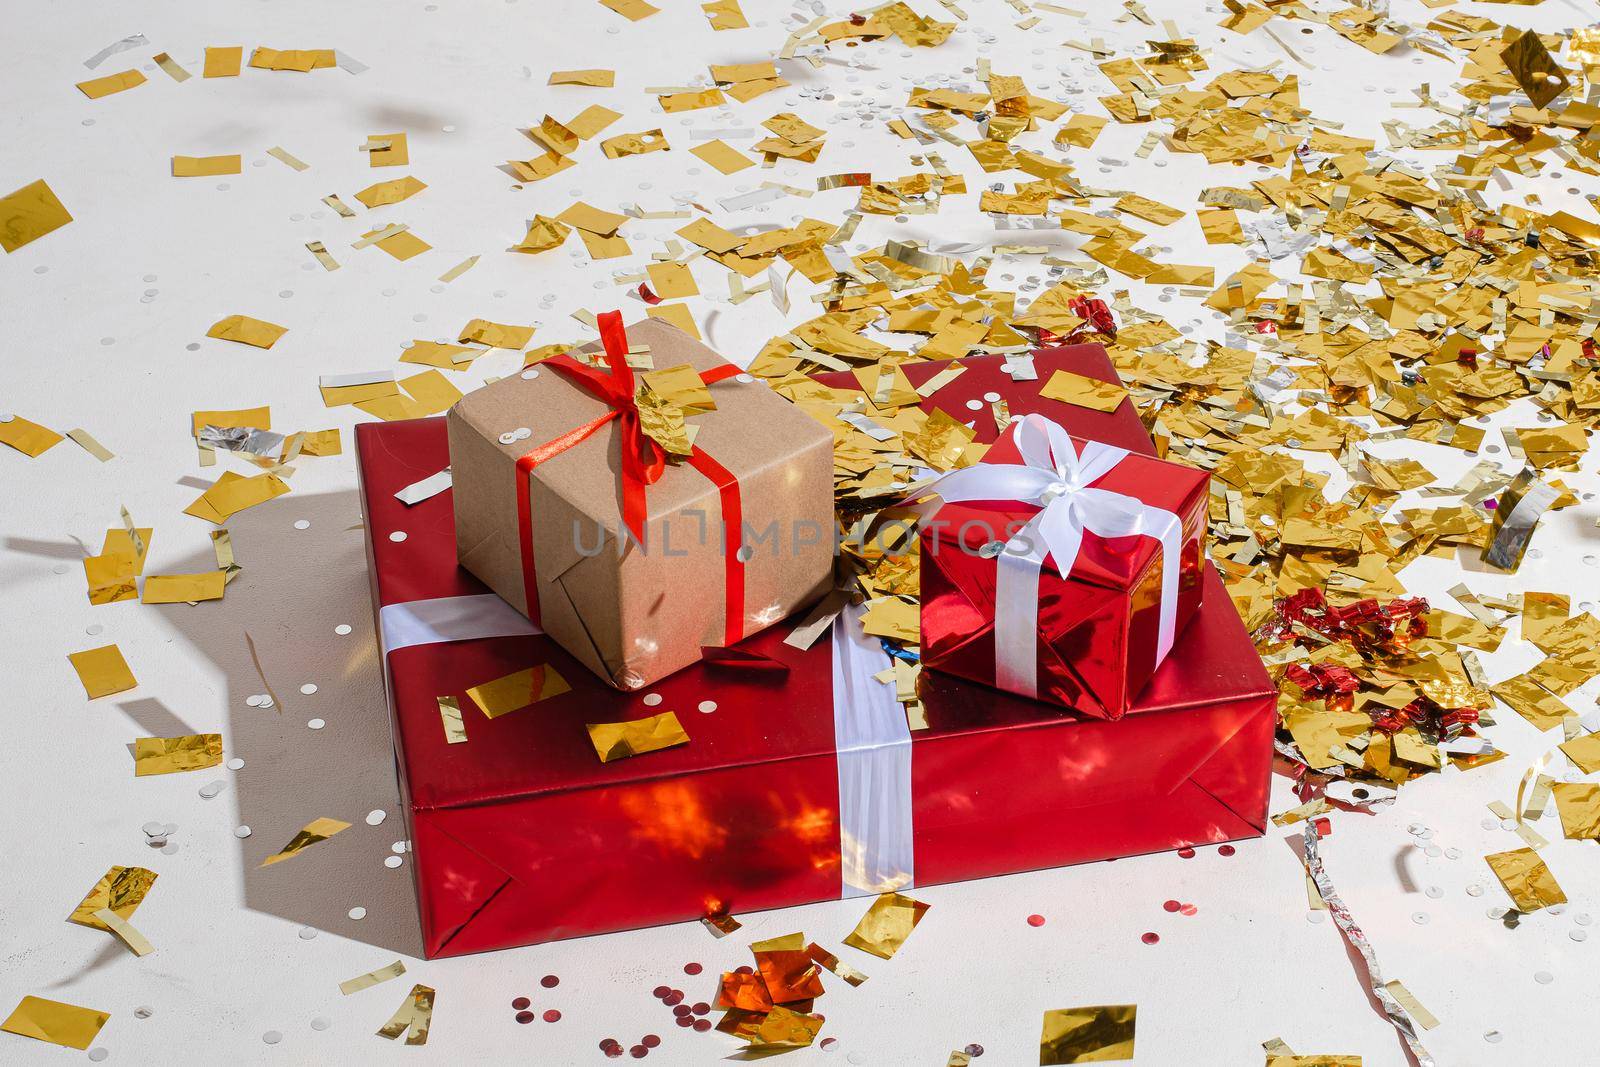 Shimmering presents wrapped beautifully for New Year by StudioLucky